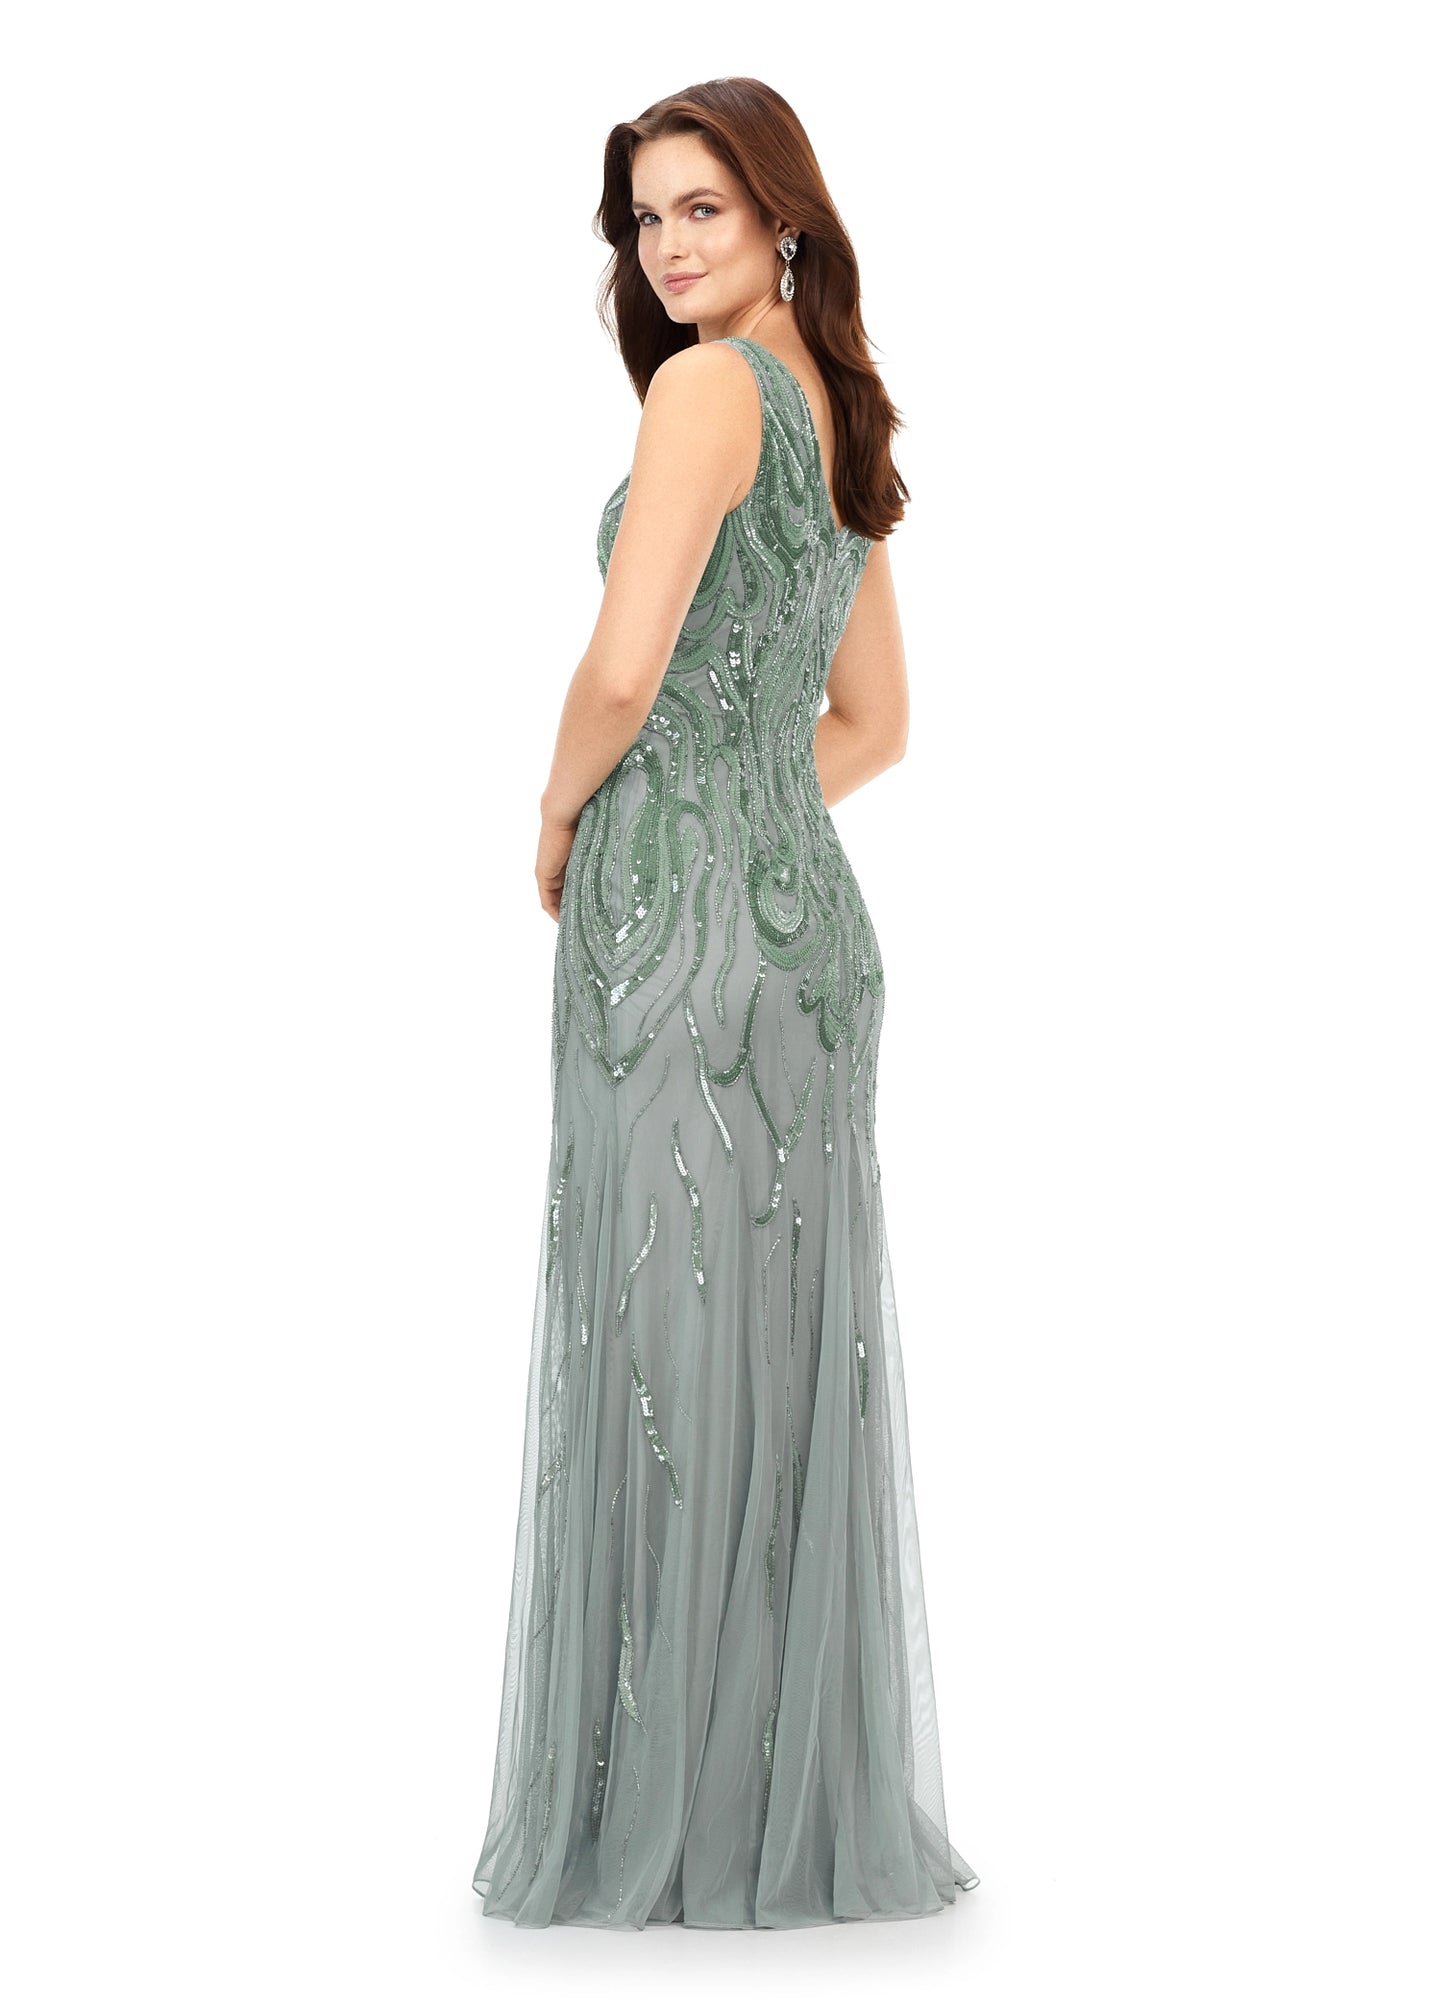 Ashley Lauren 11204 V-Neck Sequin V-Back Hand Beaded Sheer Long Evening Dress. This classic fitted gown features a v-neckline, v-back and a flattering bead pattern.